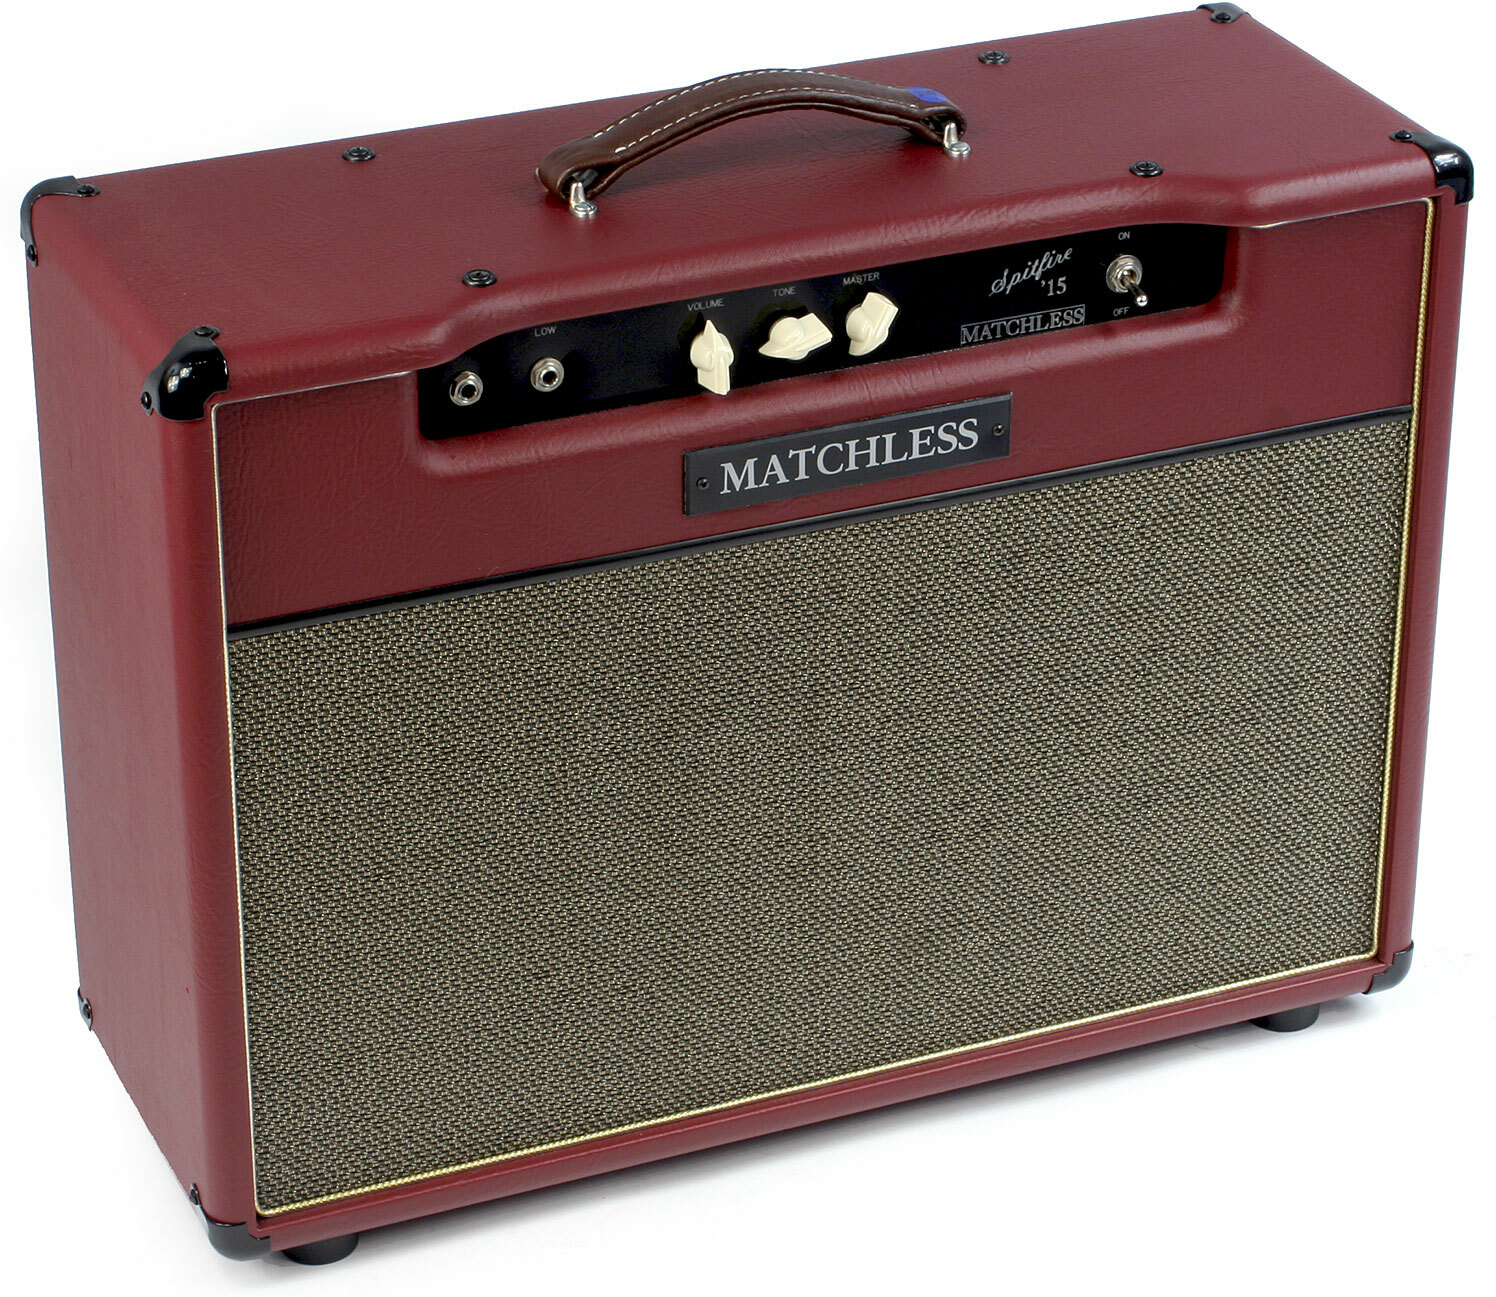 Matchless Spitfire 15 112 Reverb 15w 1x12 Burgundy/gold - Electric guitar combo amp - Main picture